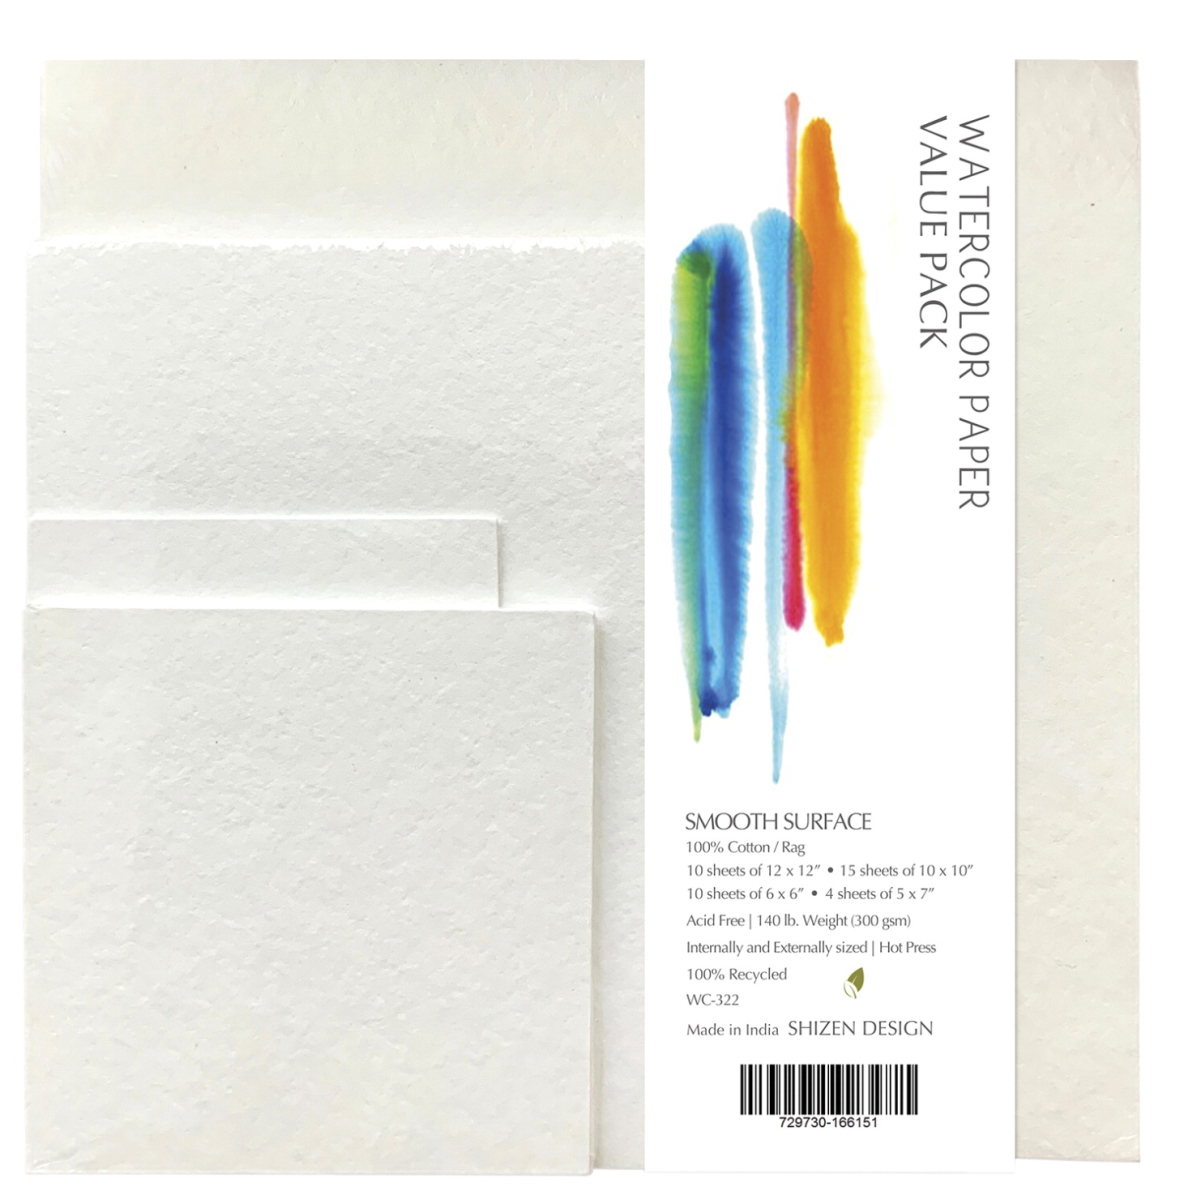 2023489 Watercolor Paper Value Pack With 39 Sheets, White - 140 Lbs